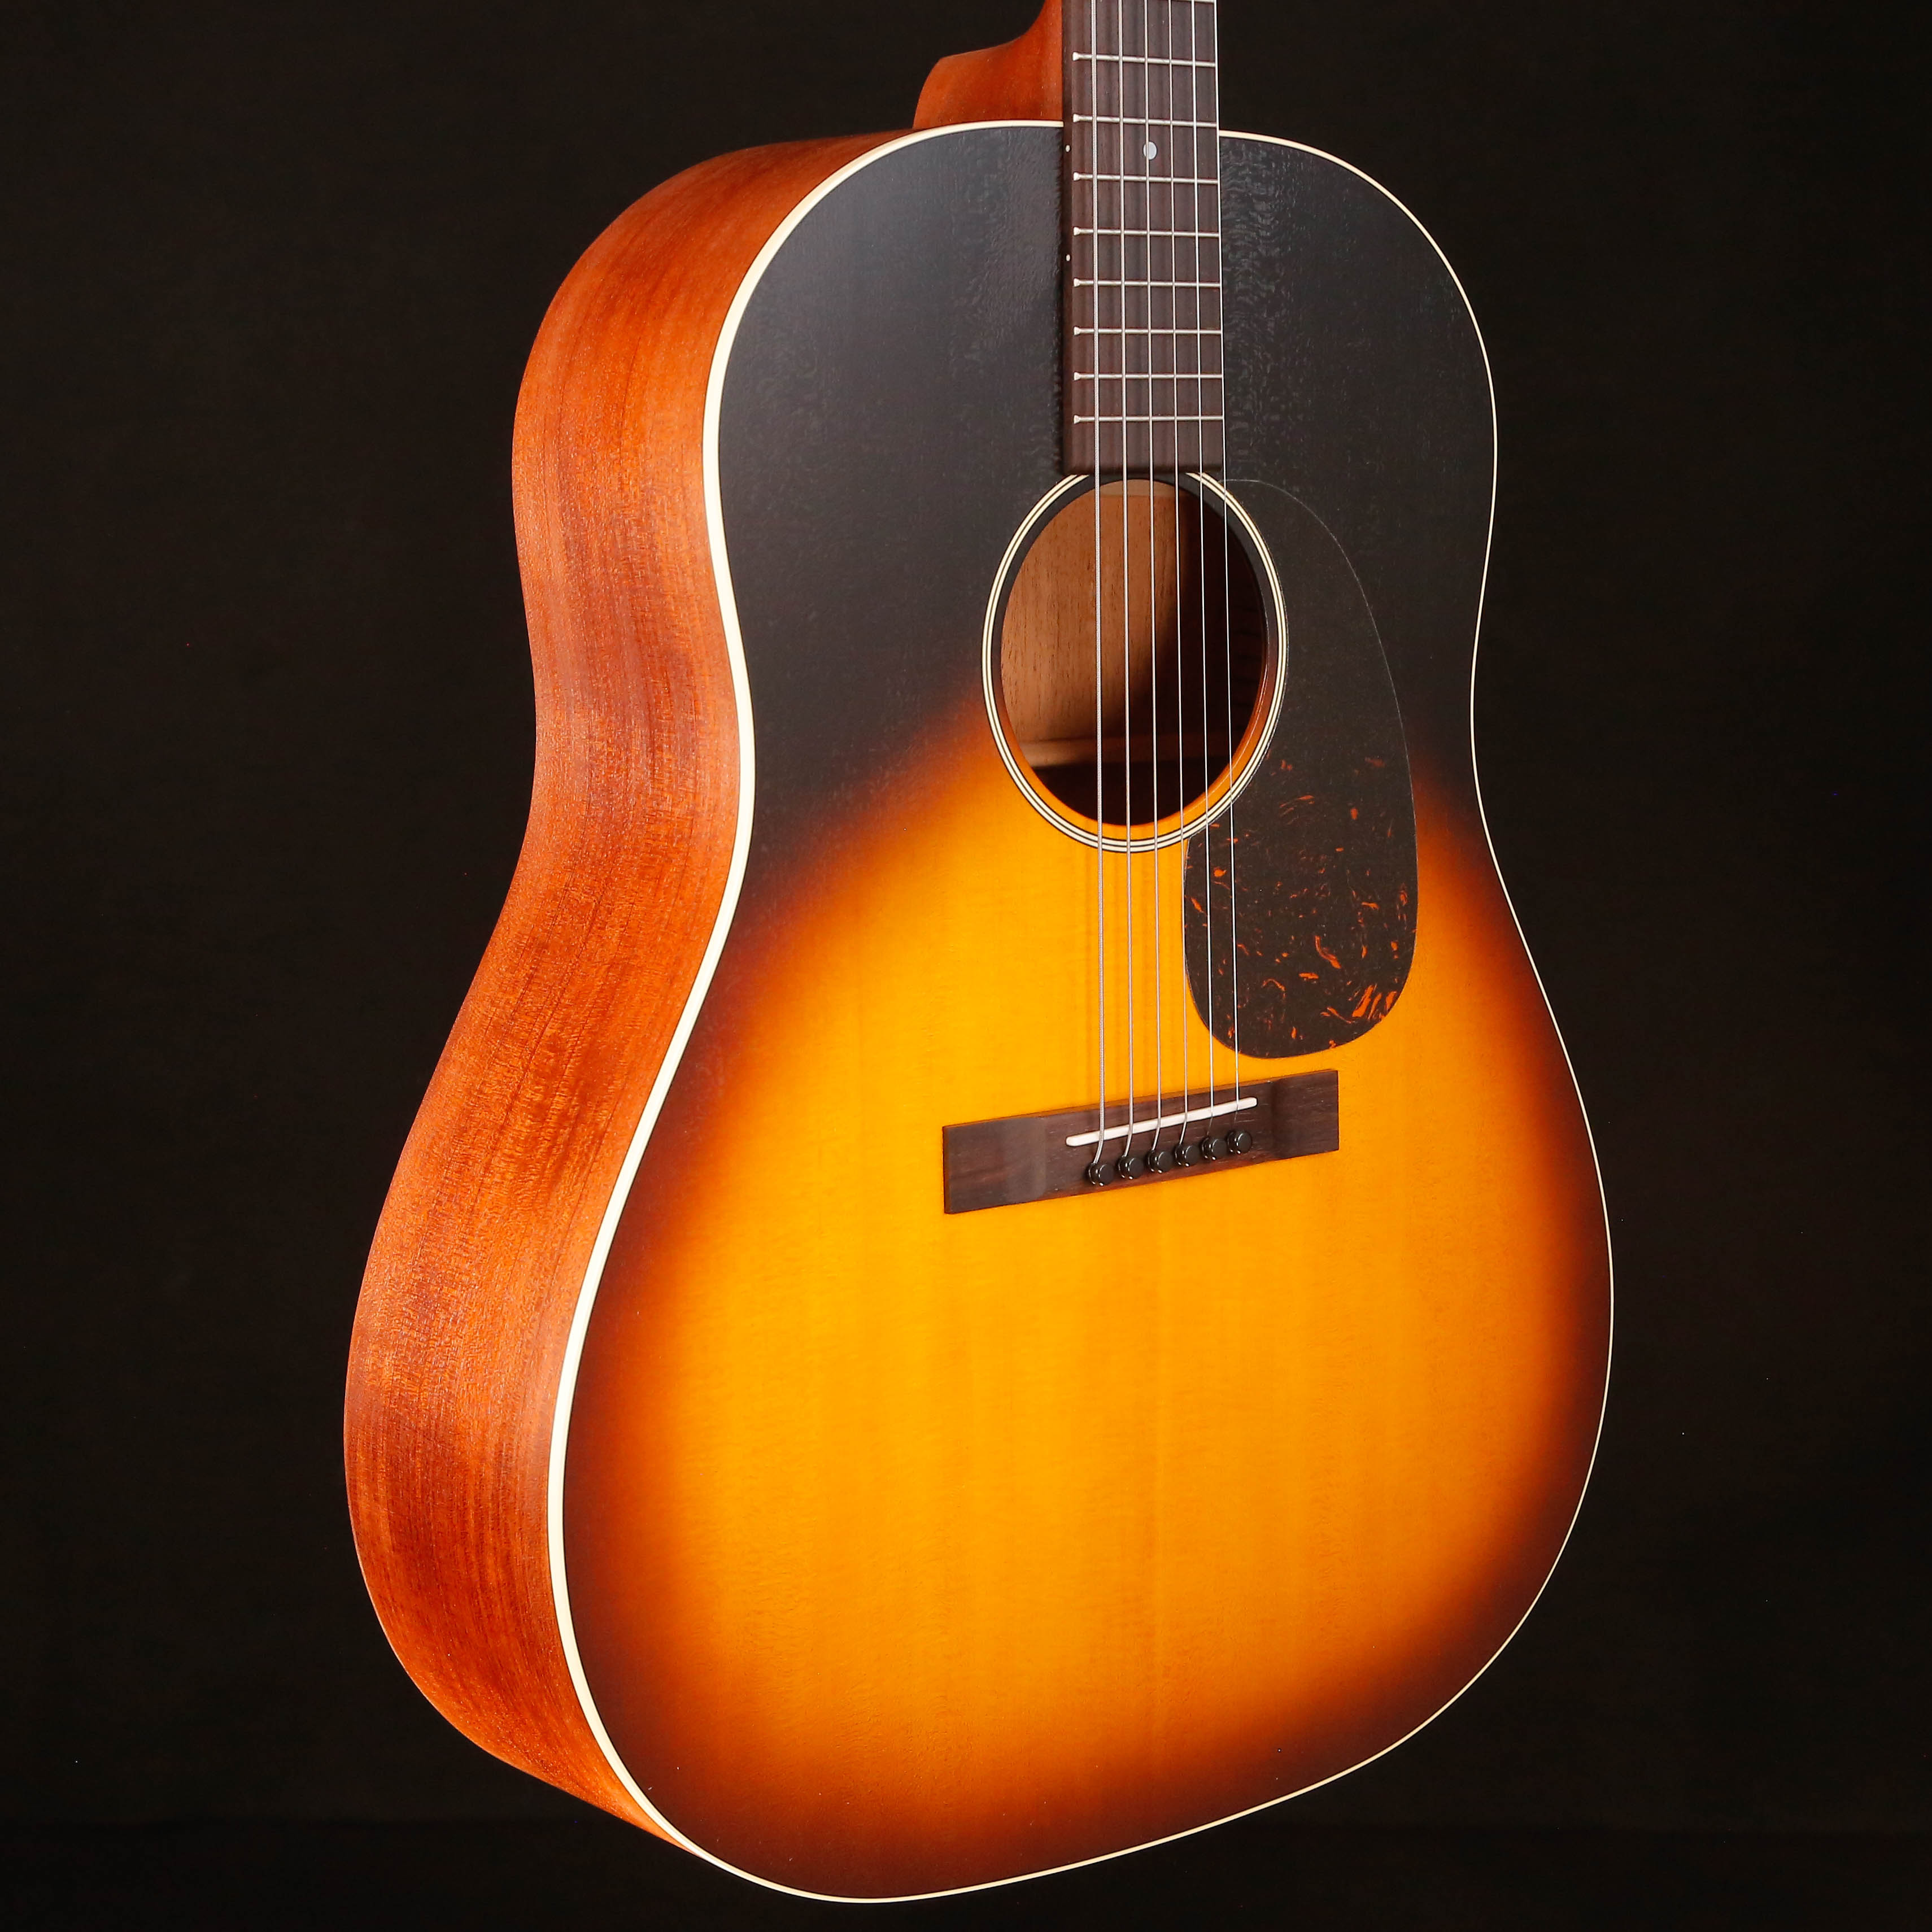 Martin DSS-17 Whiskey Sunset 16/17 Series (Case Included) w TONERITE AGING! 3lbs 11oz